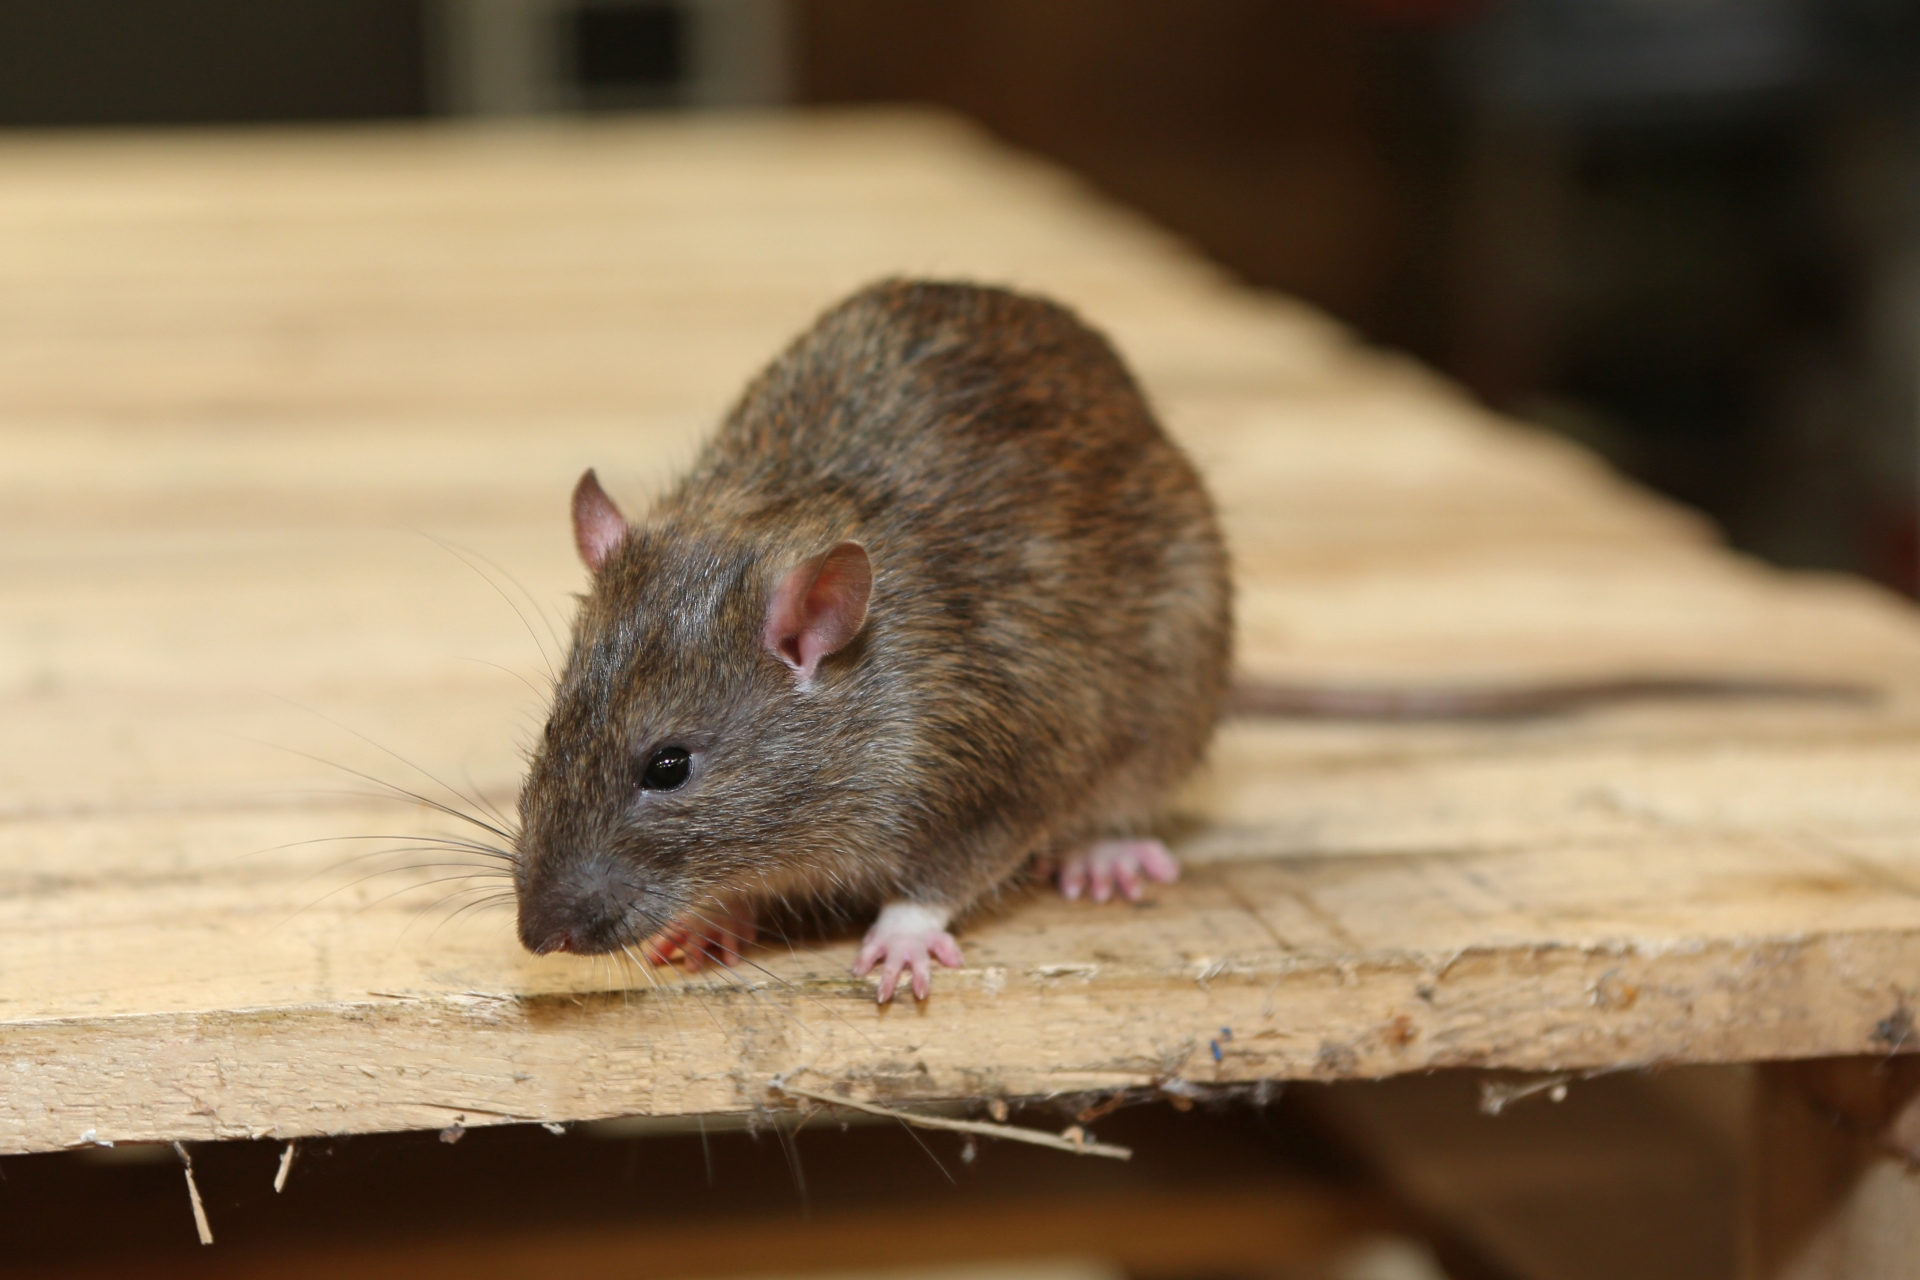 Rat Infestation, Pest Control in Shoreditch, E2. Call Now 020 8166 9746